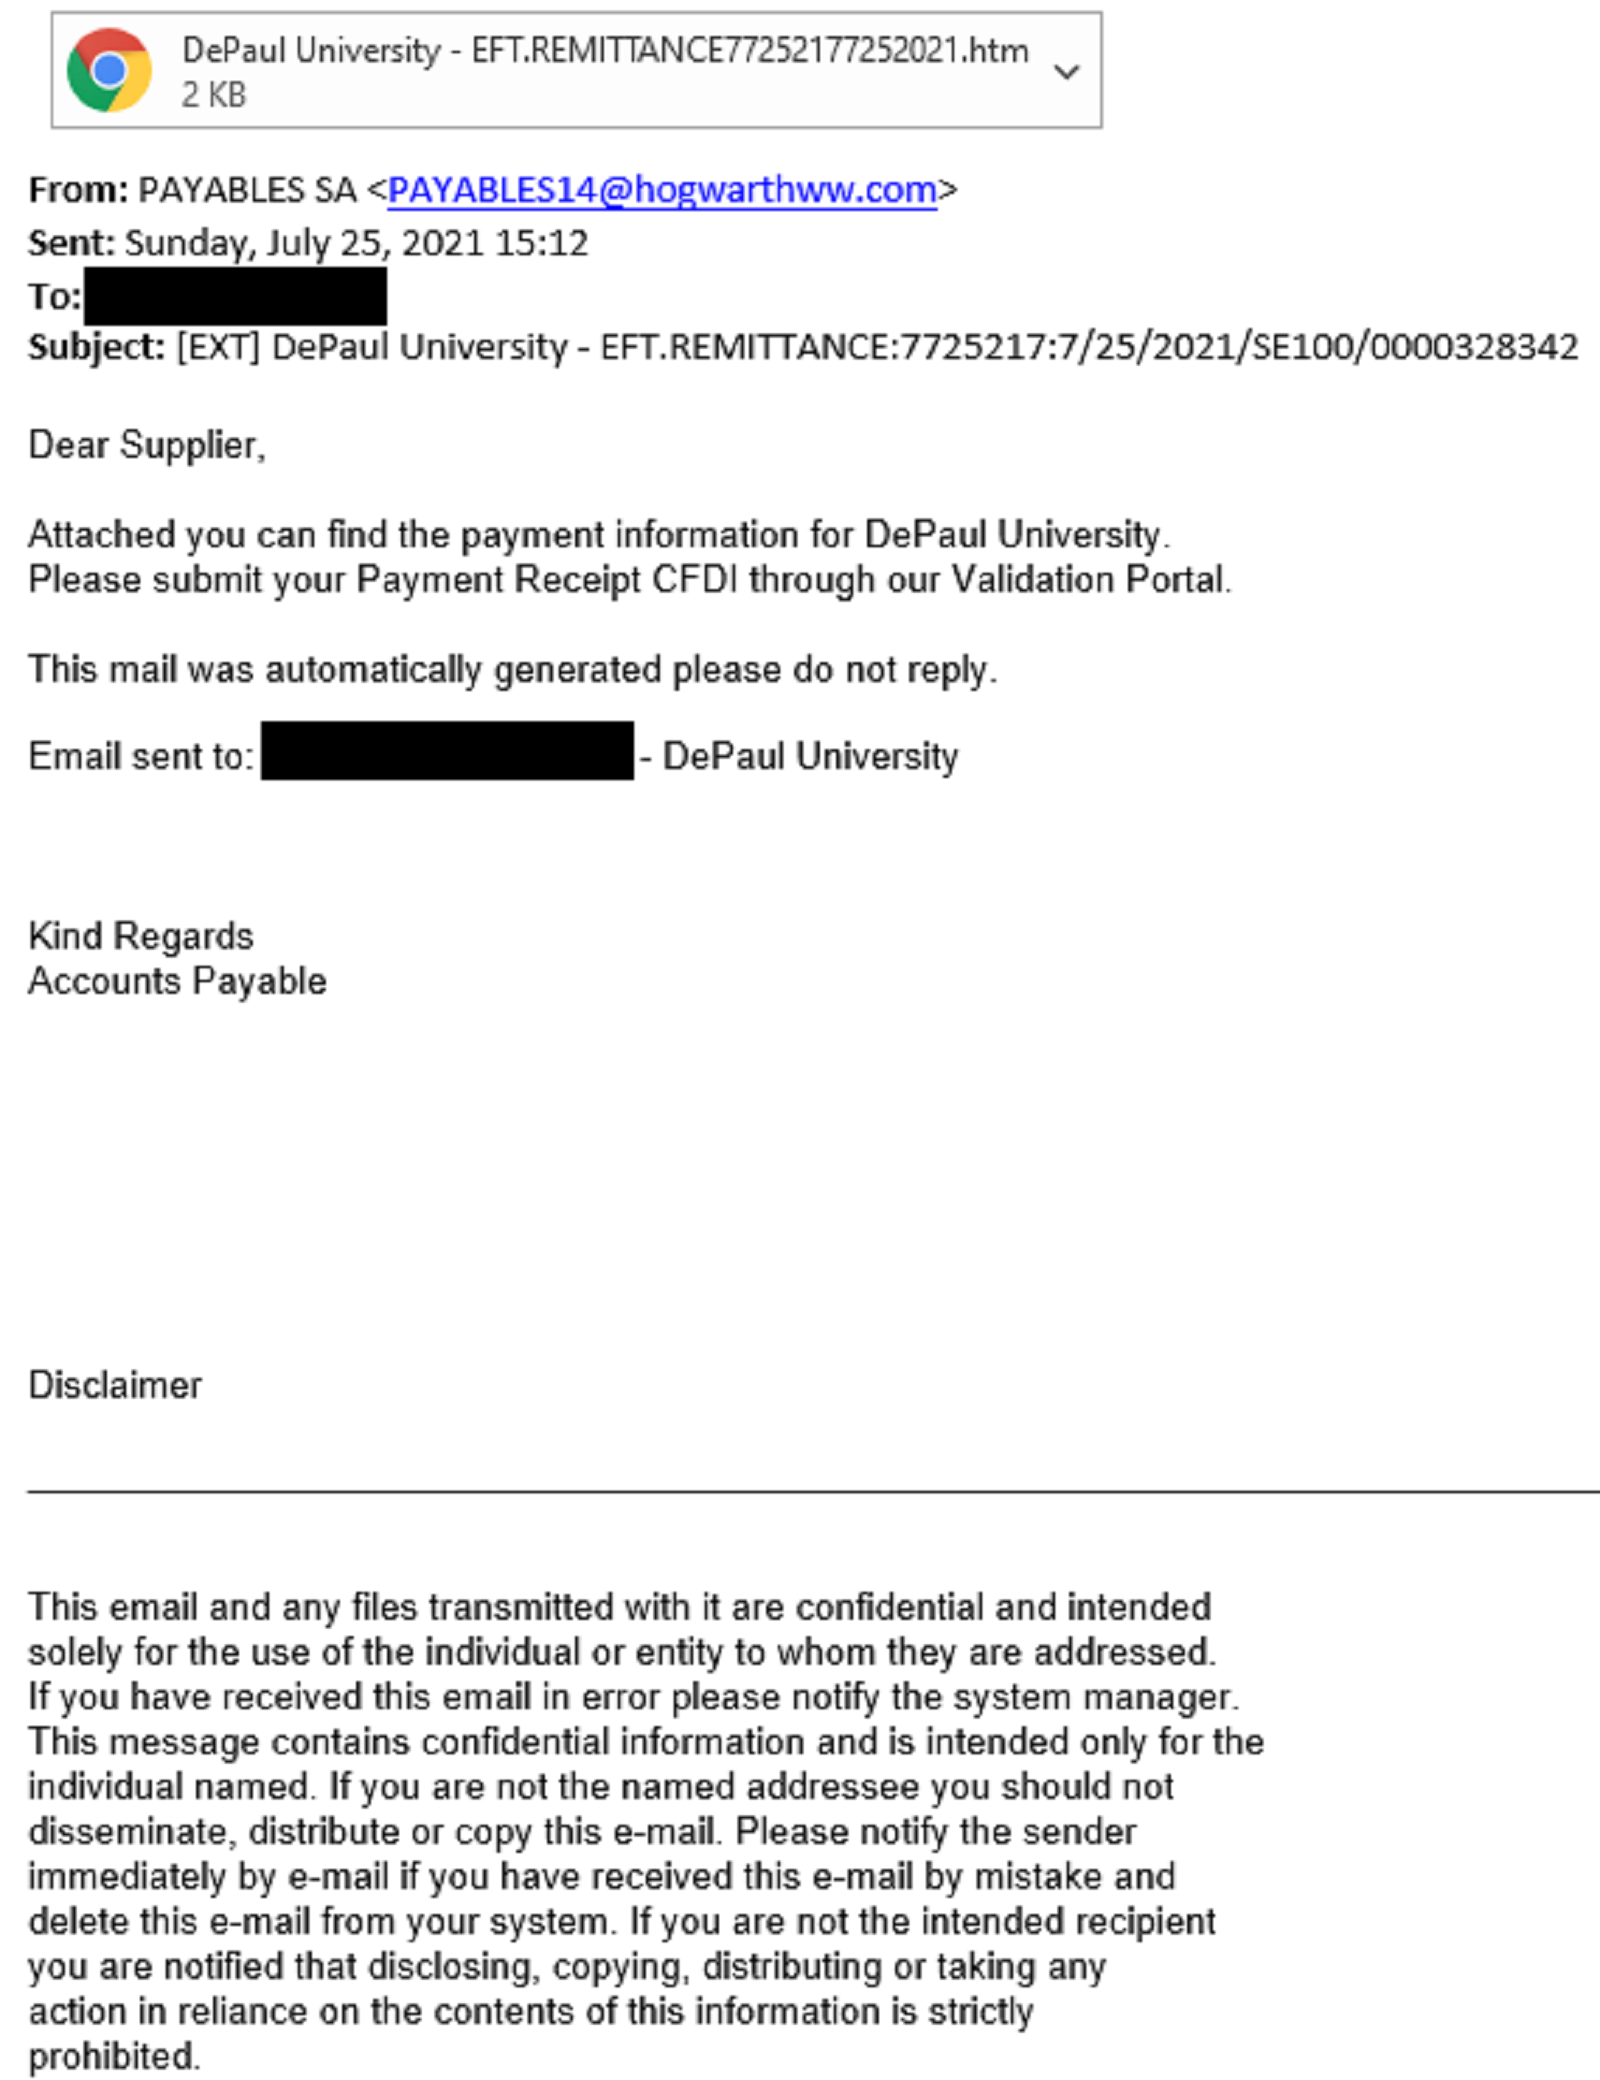 An image of a malicious email. The email attempts to convince the recipient to click on a malicious attachment under the guise of it being payment information.